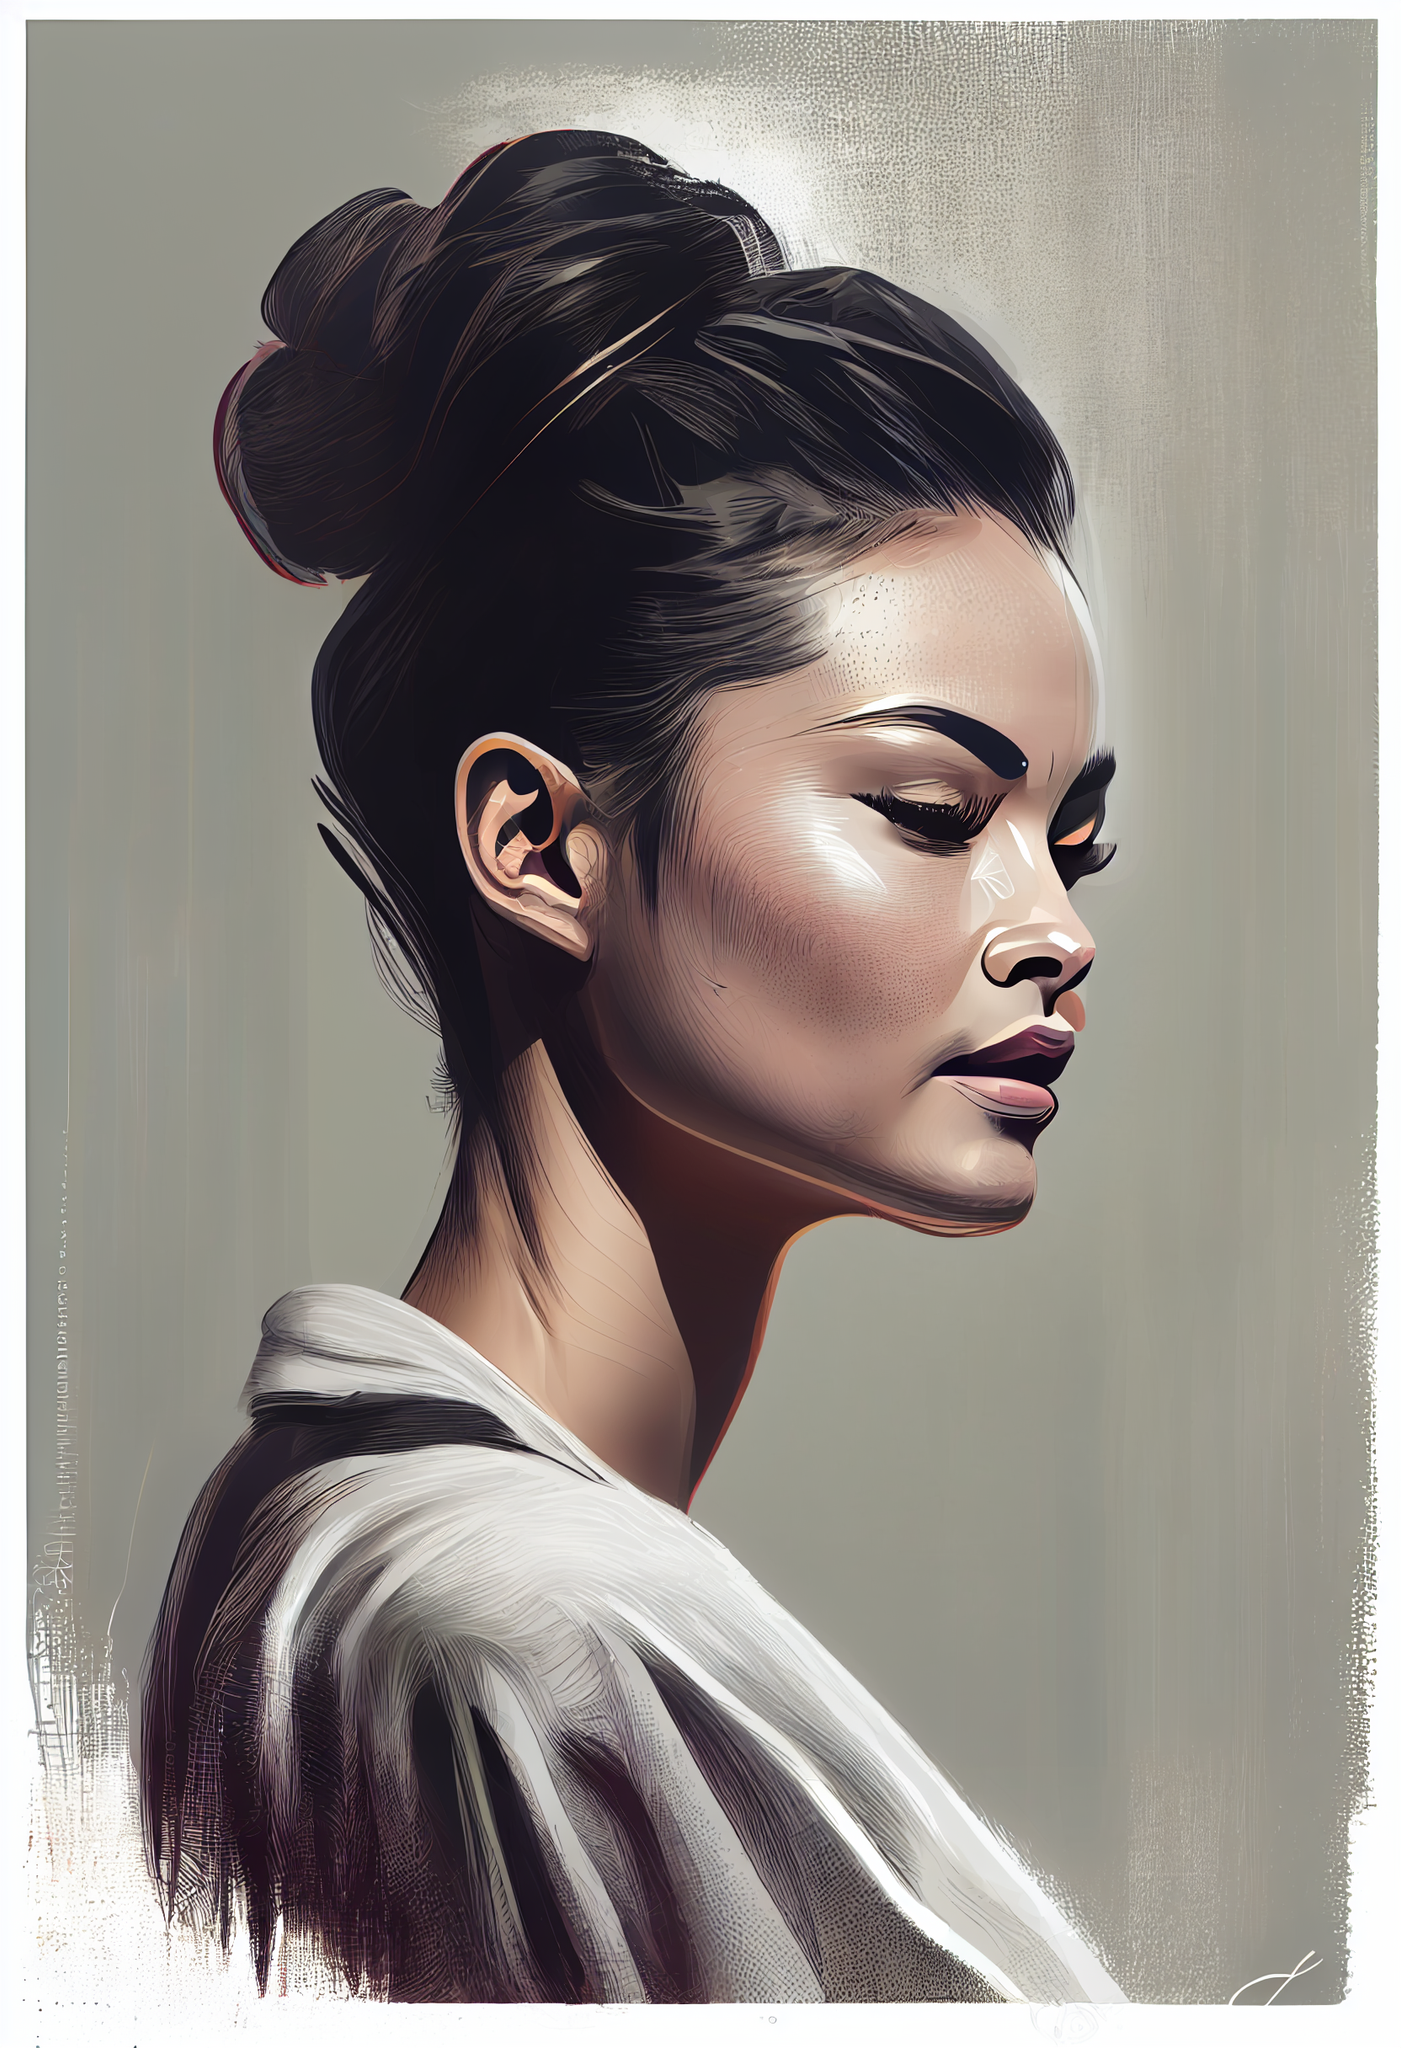 Dreamy Asian Beauty: Airbrush Print of a Model with a Top Hair Bun and Dramatic Eye Makeup on Linen-Look Grey Background